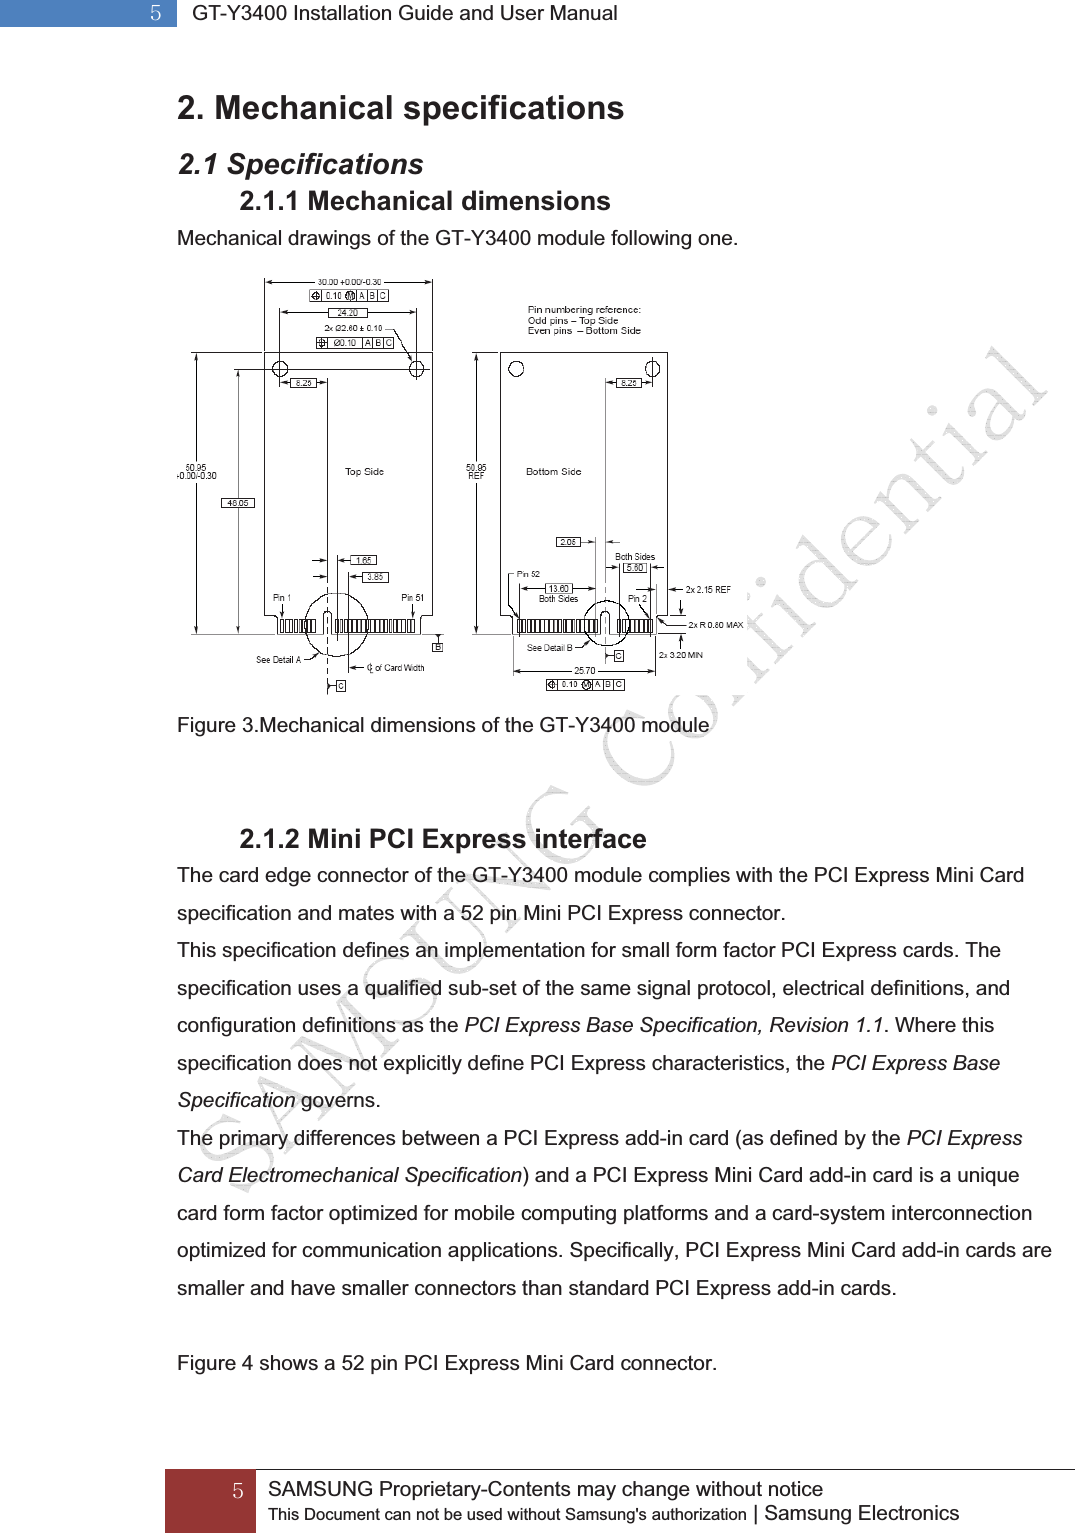 G\GGSAMSUNG Proprietary-Contents may change without notice This Document can not be used without Samsung&apos;s authorization | Samsung Electronics G\G GT-Y3400 Installation Guide and User ManualG2. Mechanical specifications 2.1 Specifications 2.1.1 Mechanical dimensions Mechanical drawings of the GT-Y3400 module following one.  Figure 3.Mechanical dimensions of the GT-Y3400 module  2.1.2 Mini PCI Express interface The card edge connector of the GT-Y3400 module complies with the PCI Express Mini Card specification and mates with a 52 pin Mini PCI Express connector. This specification defines an implementation for small form factor PCI Express cards. The   specification uses a qualified sub-set of the same signal protocol, electrical definitions, and   configuration definitions as the PCI Express Base Specification, Revision 1.1. Where this specification does not explicitly define PCI Express characteristics, the PCI Express Base Specification governs. The primary differences between a PCI Express add-in card (as defined by the PCI Express Card Electromechanical Specification) and a PCI Express Mini Card add-in card is a unique card form factor optimized for mobile computing platforms and a card-system interconnection optimized for communication applications. Specifically, PCI Express Mini Card add-in cards are smaller and have smaller connectors than standard PCI Express add-in cards.  Figure 4 shows a 52 pin PCI Express Mini Card connector. 